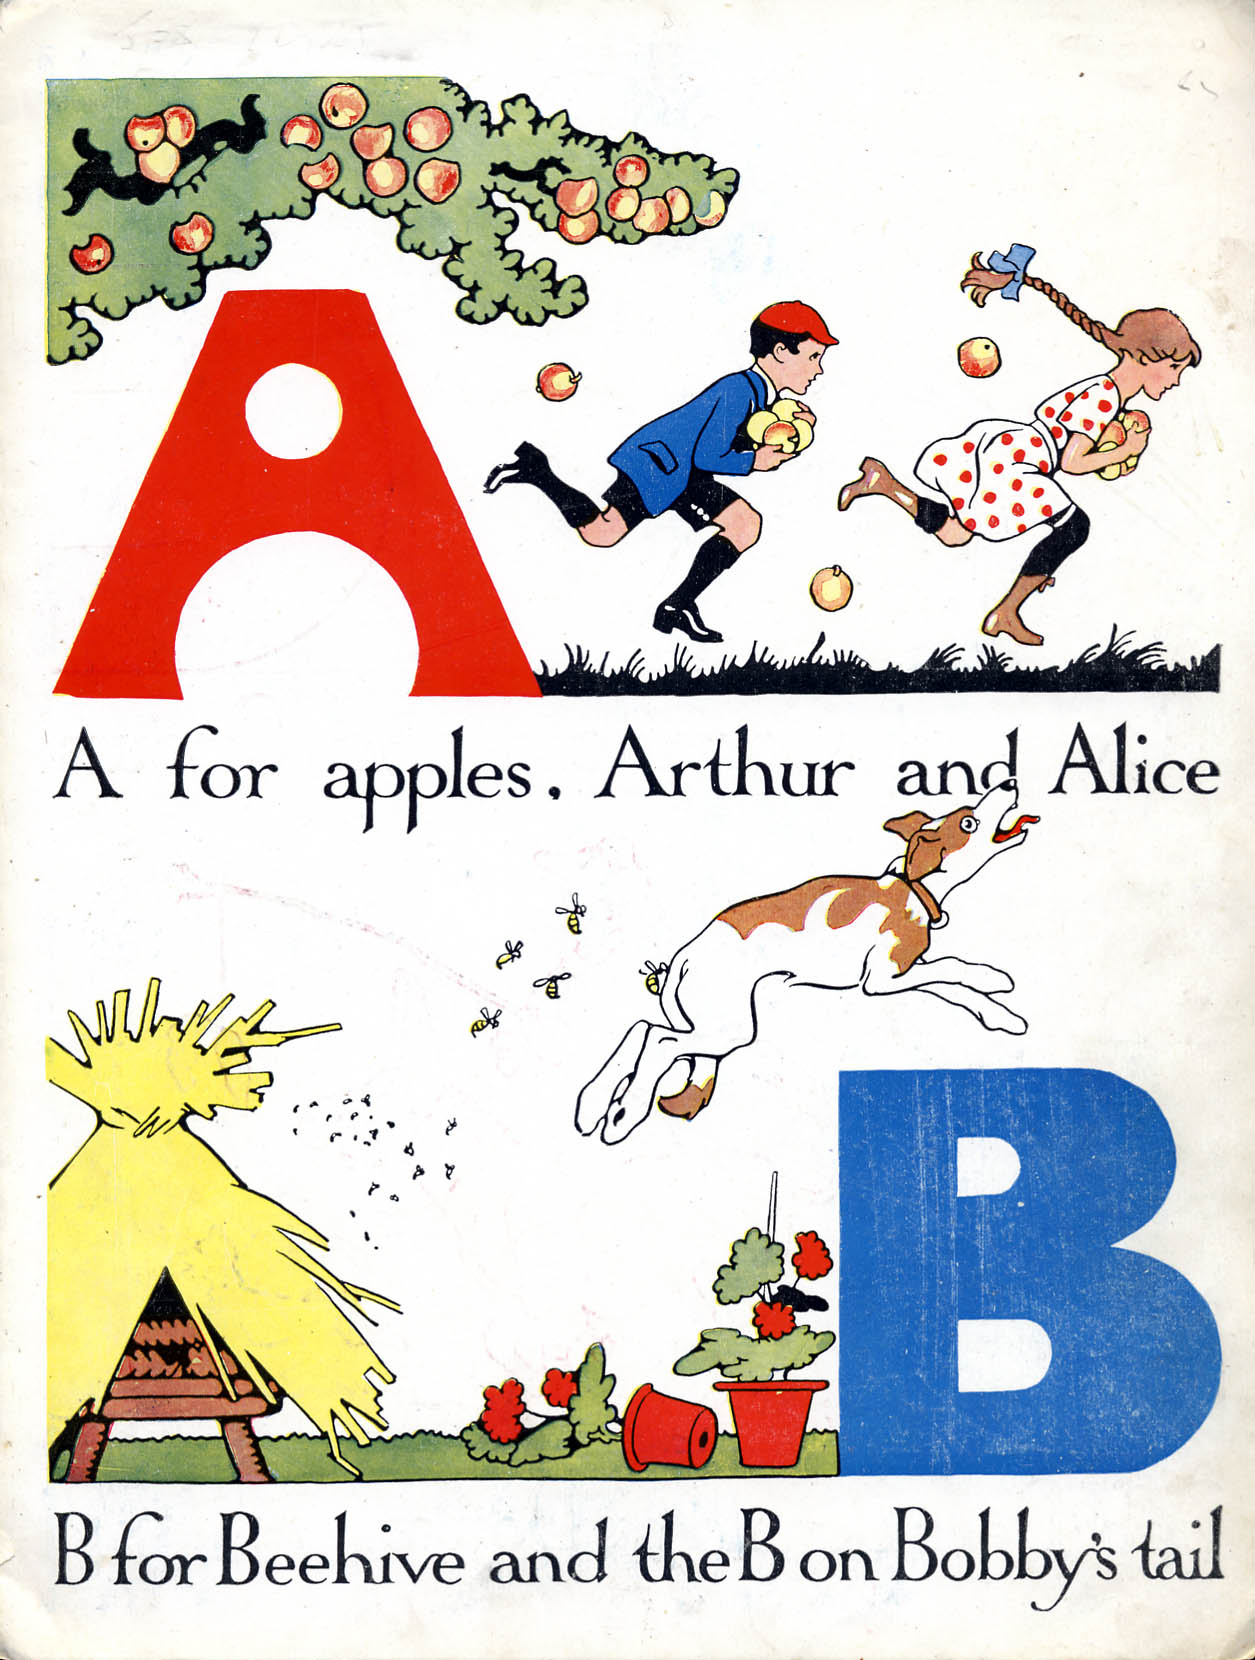 Image of letters A and B